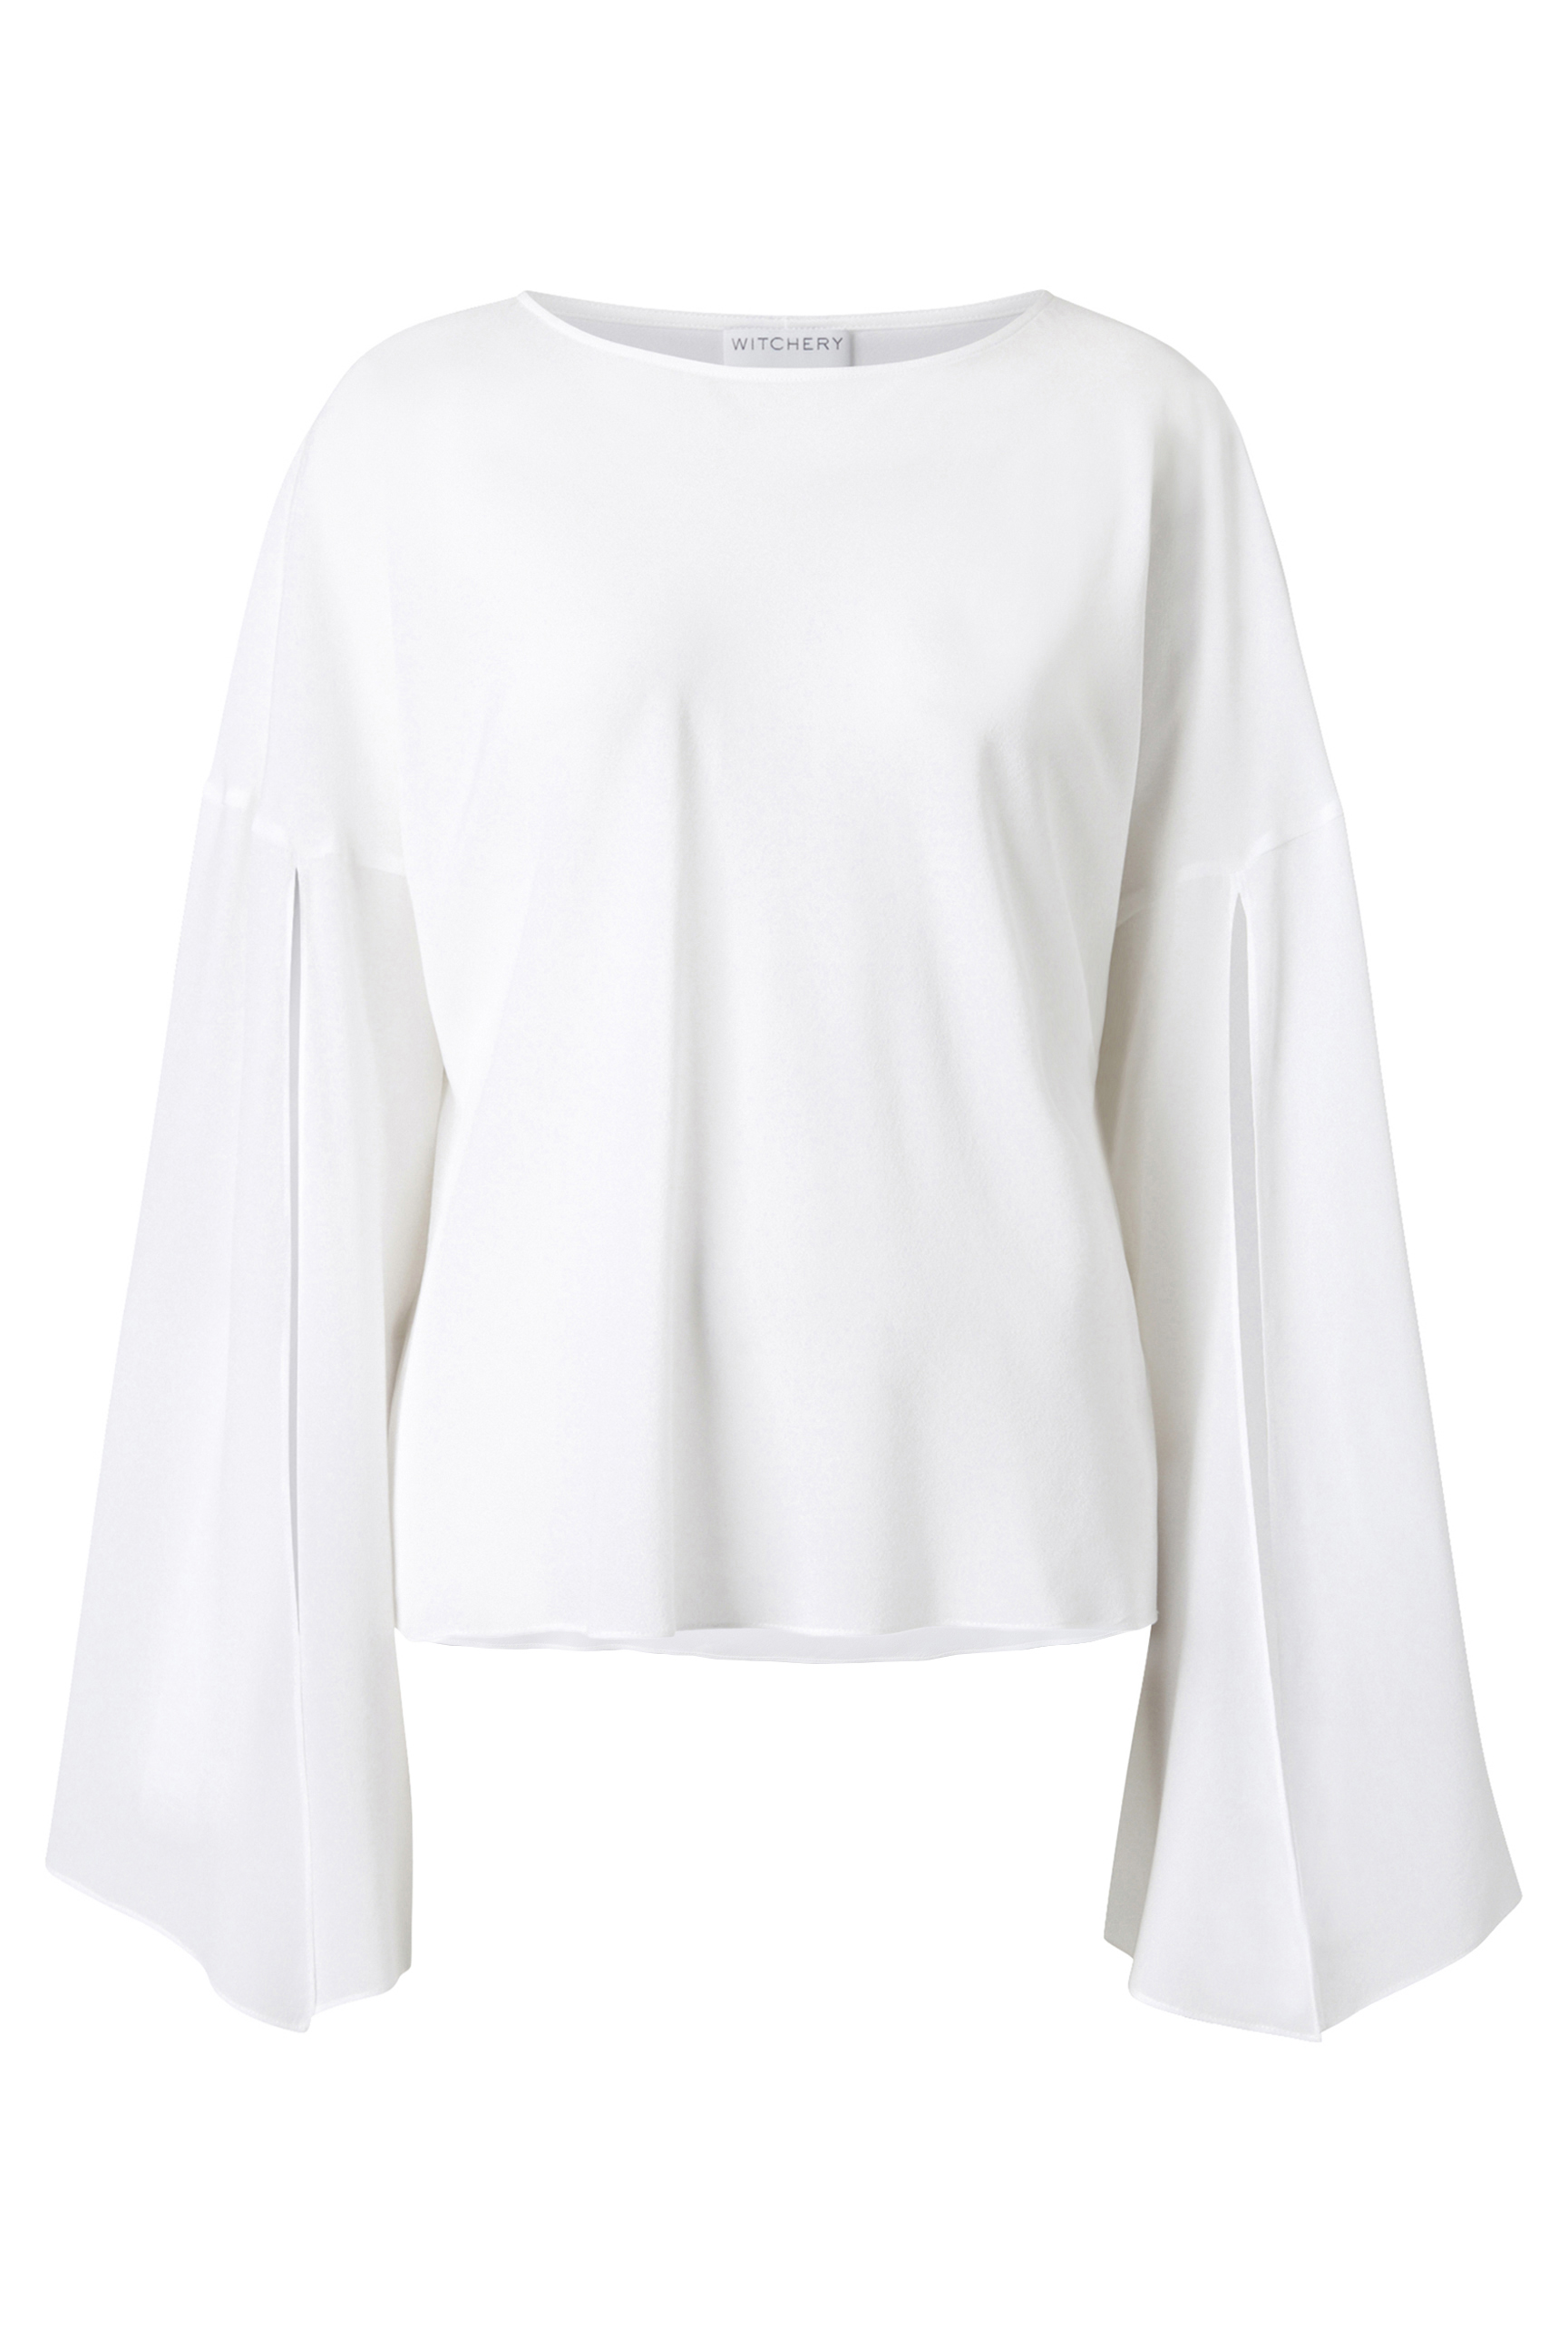 60206086_Witchery OCRF Silk Bell Blouse, RRP$229.90